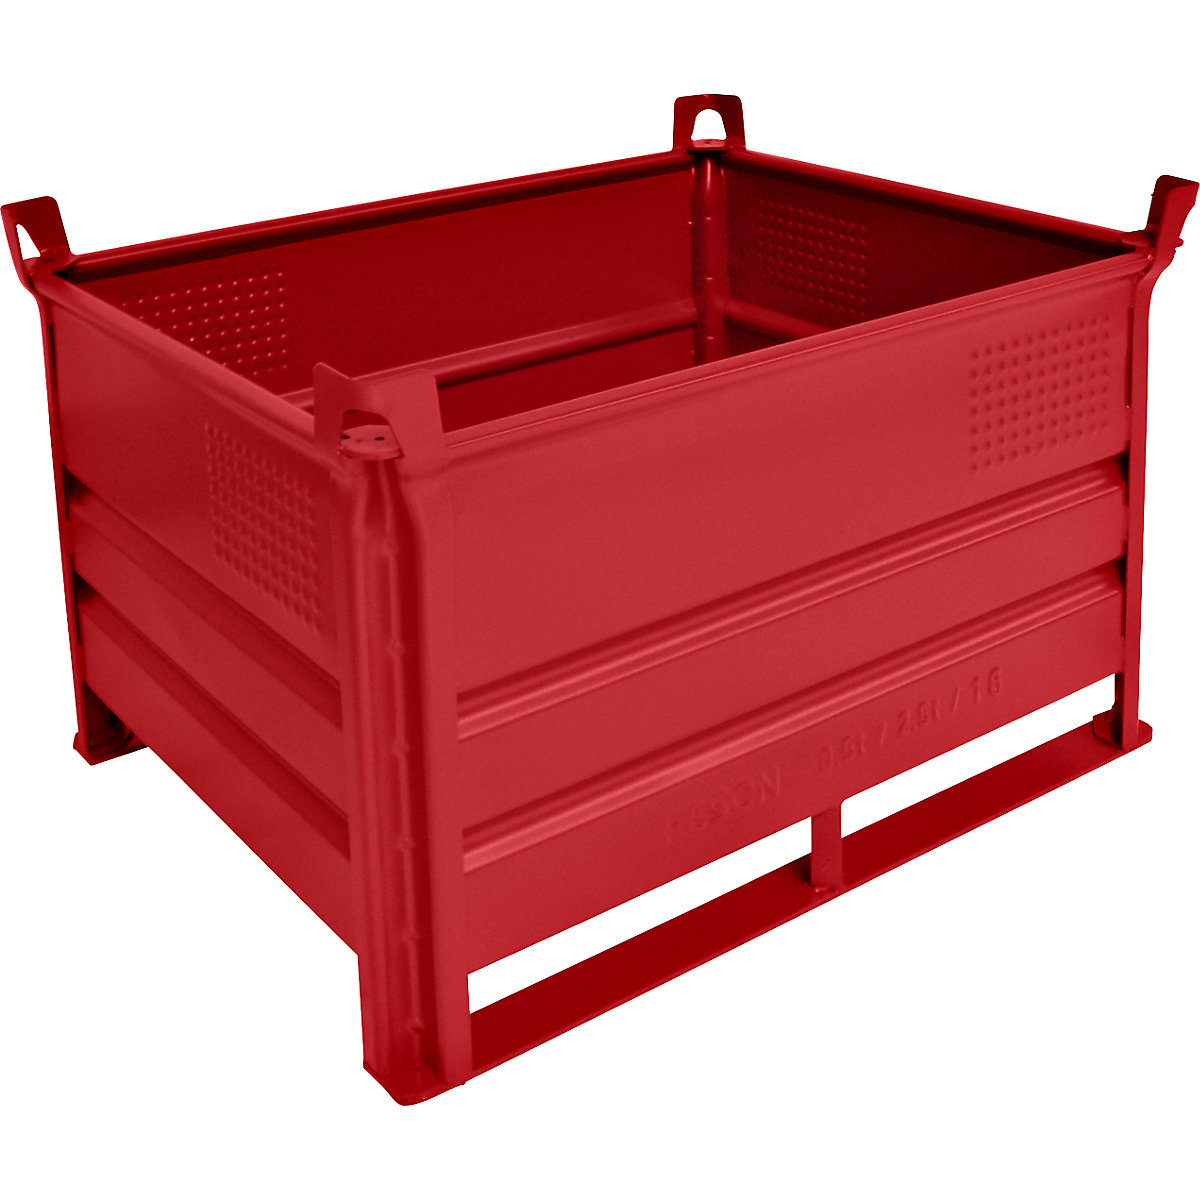 Stacking container with runners - Heson